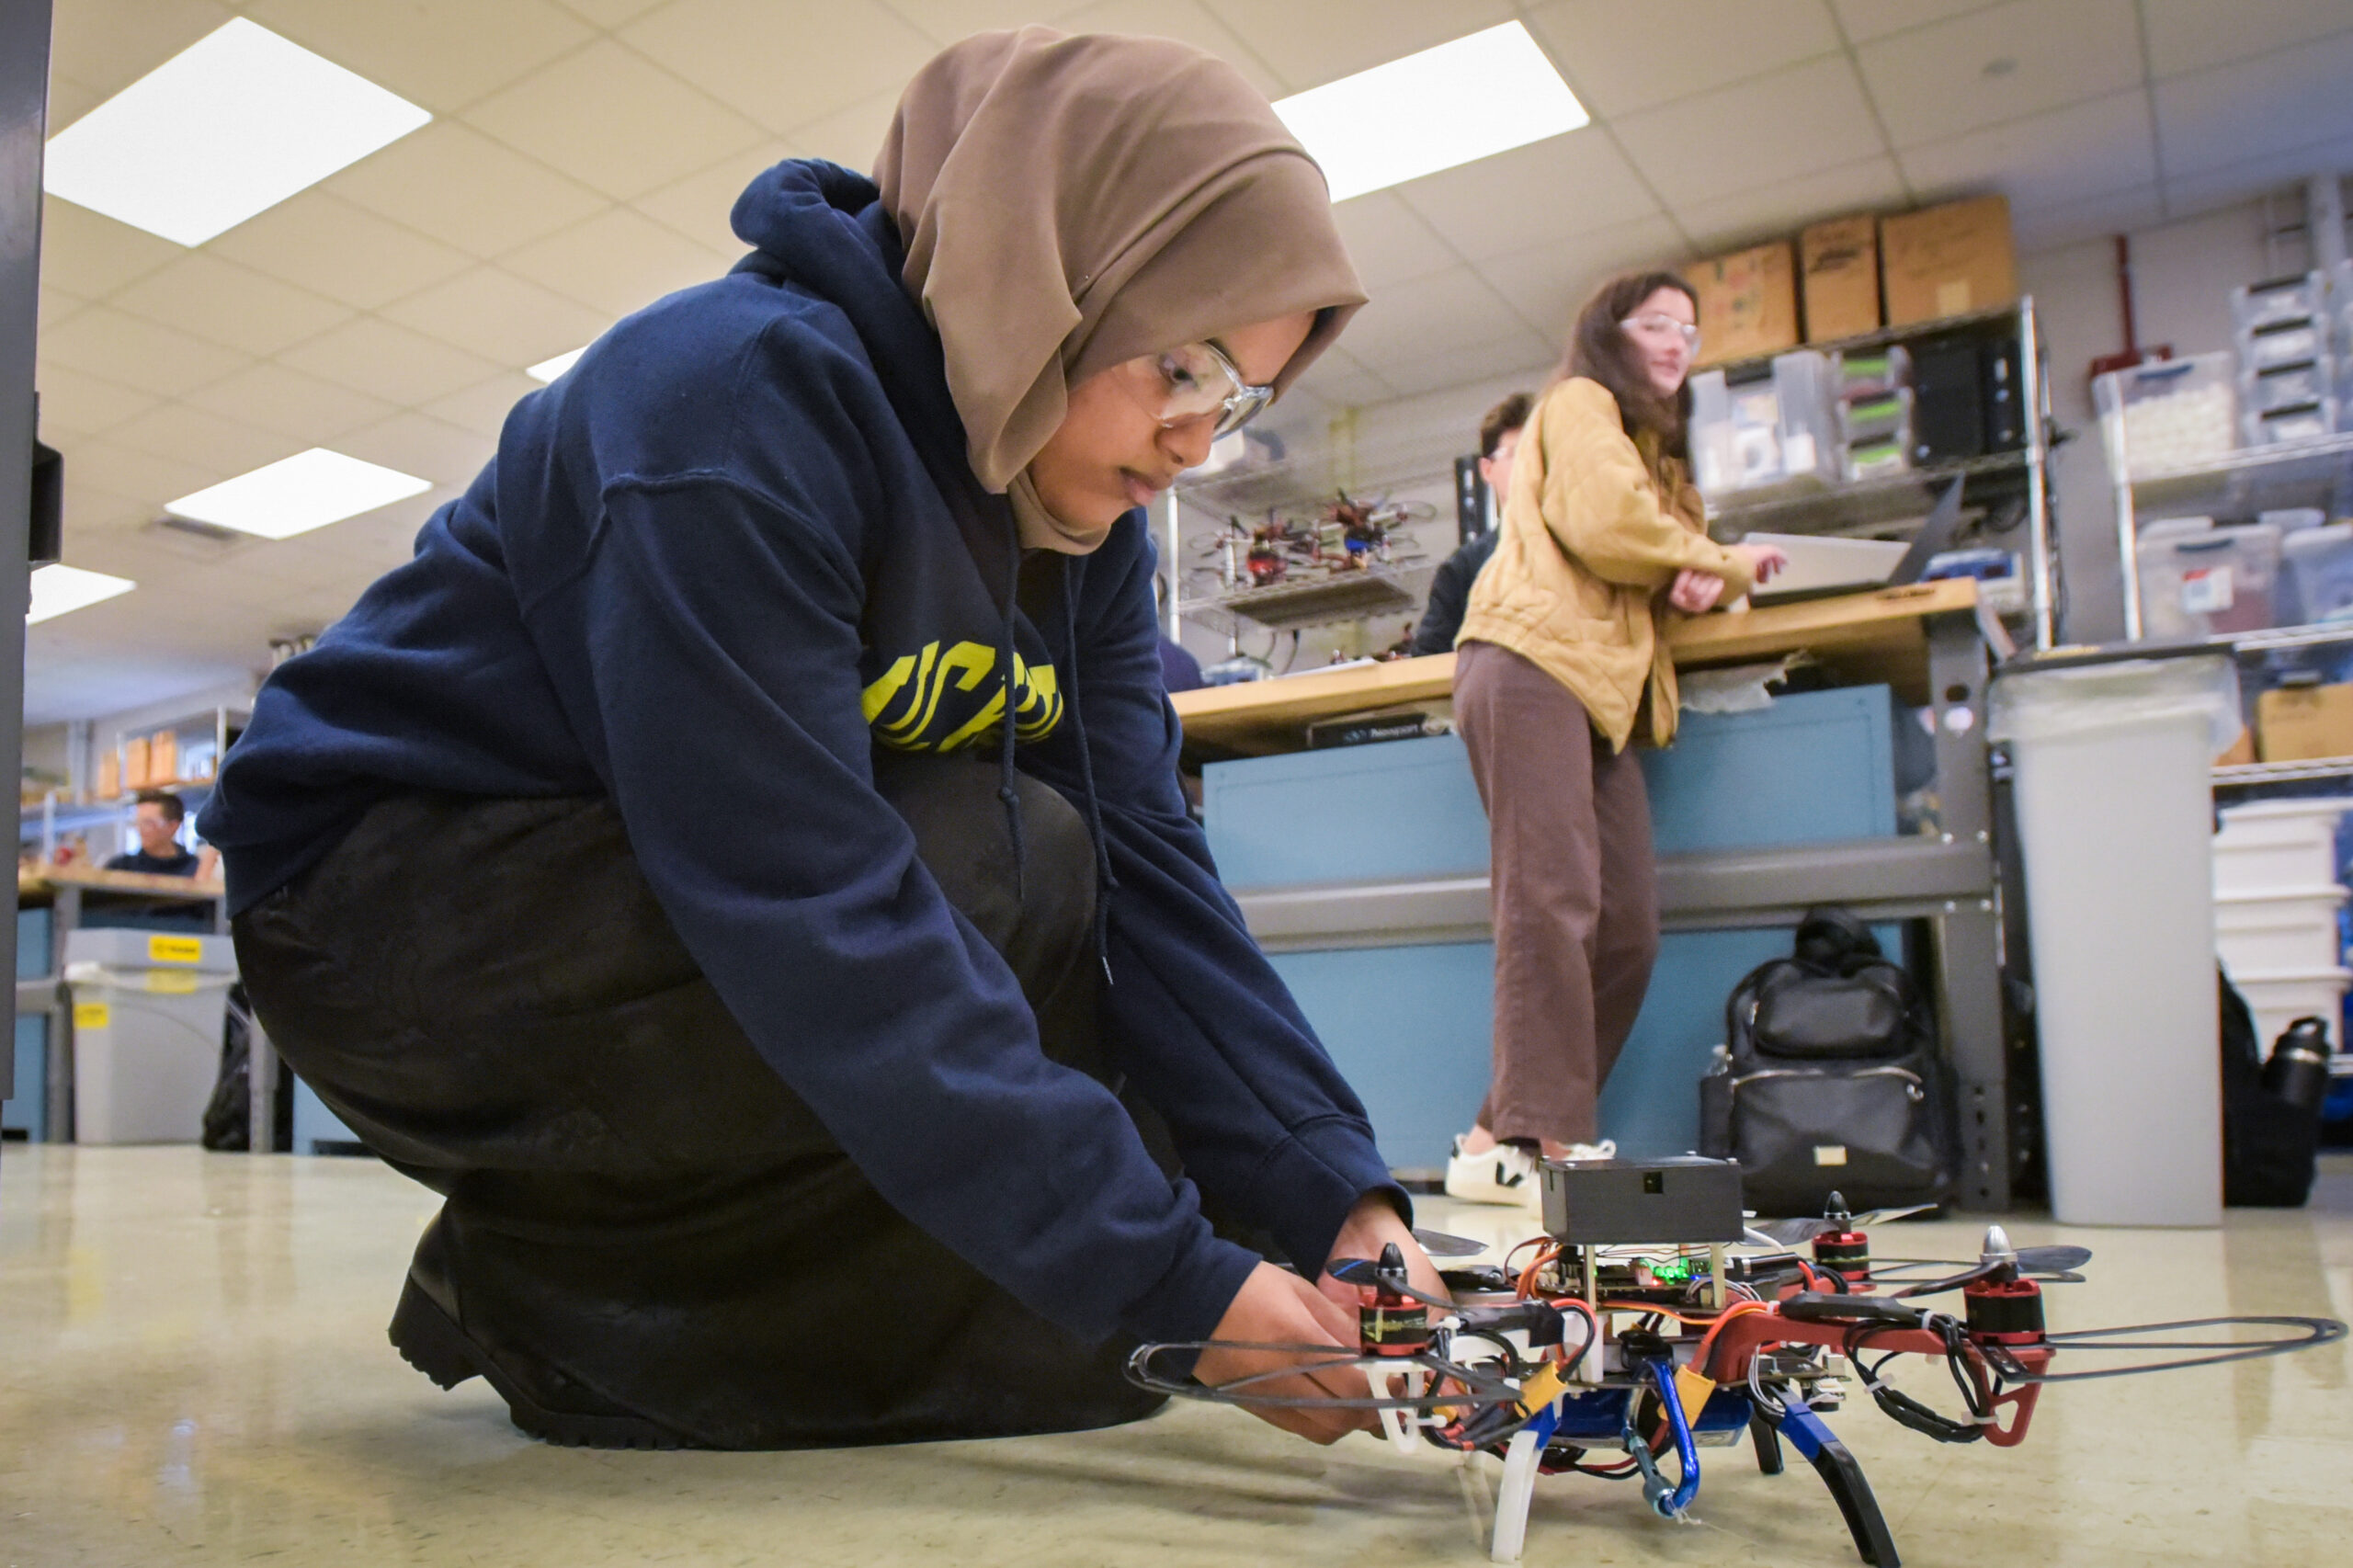 Student wearing hijab kneeling on ground working on drone